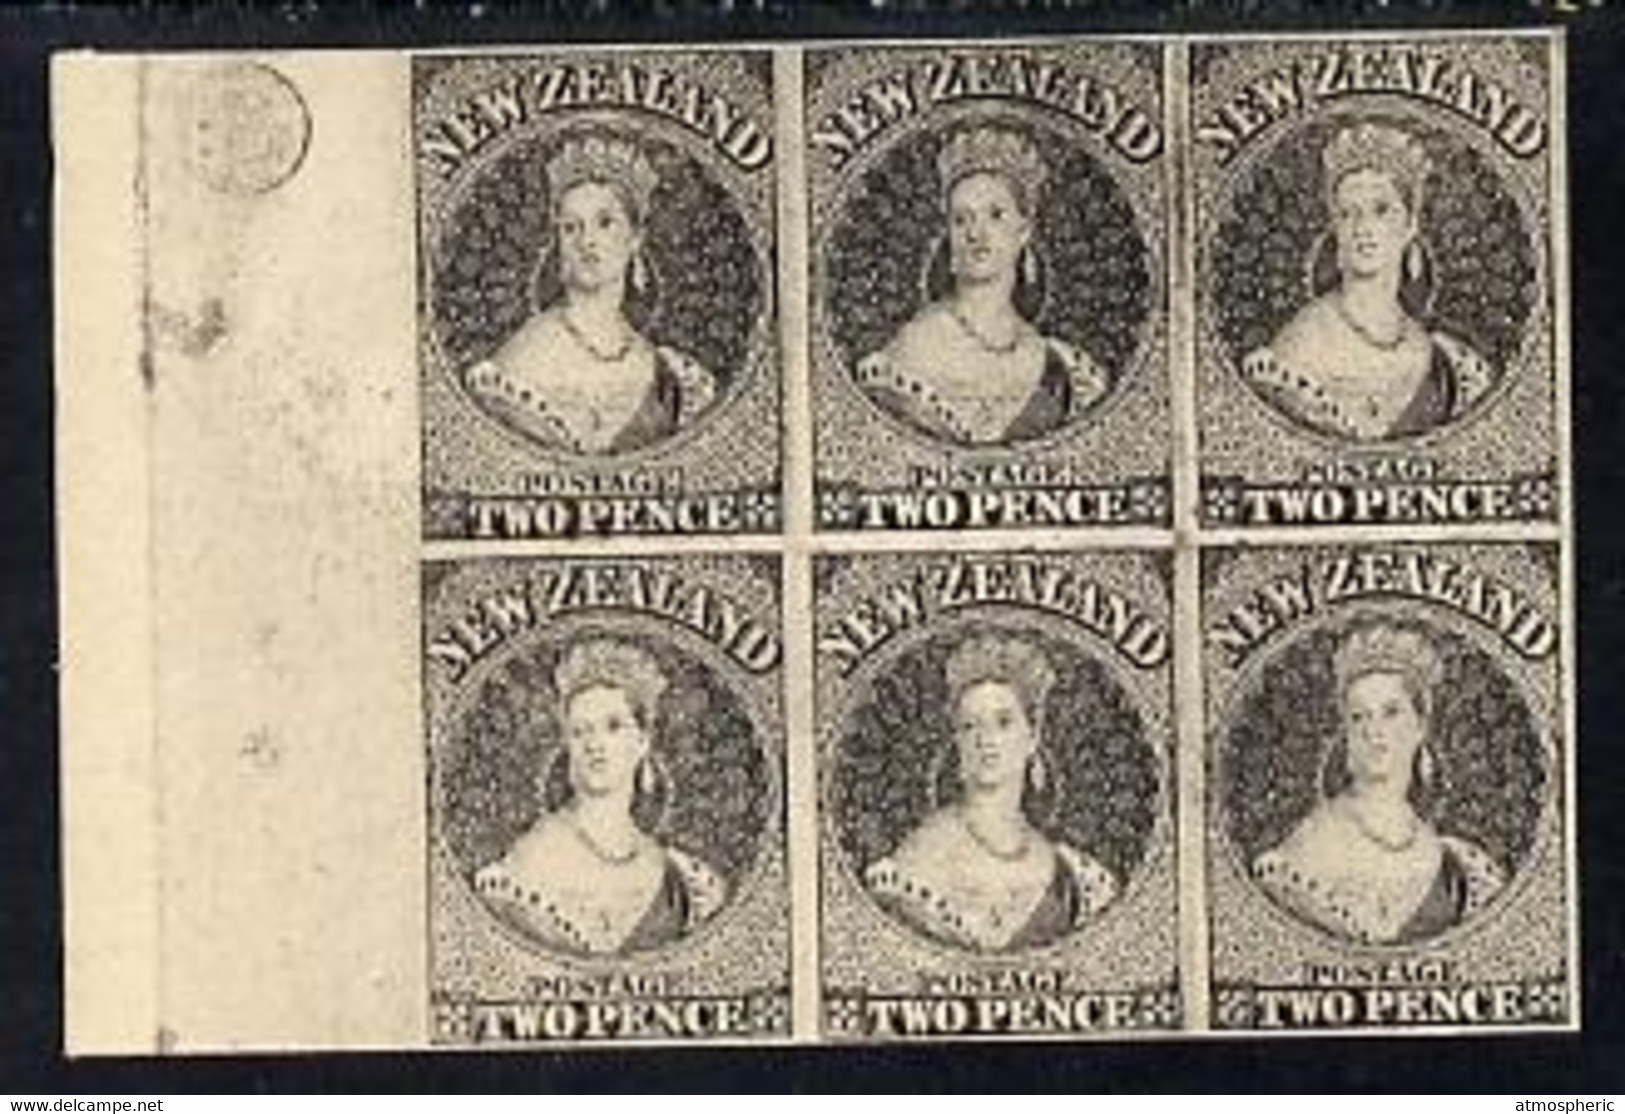 New Zealand 1855 Chalon Head 2d Hausberg's Imperf Proof Block Of 6 In Black On White Card, Very Fine - Nuovi